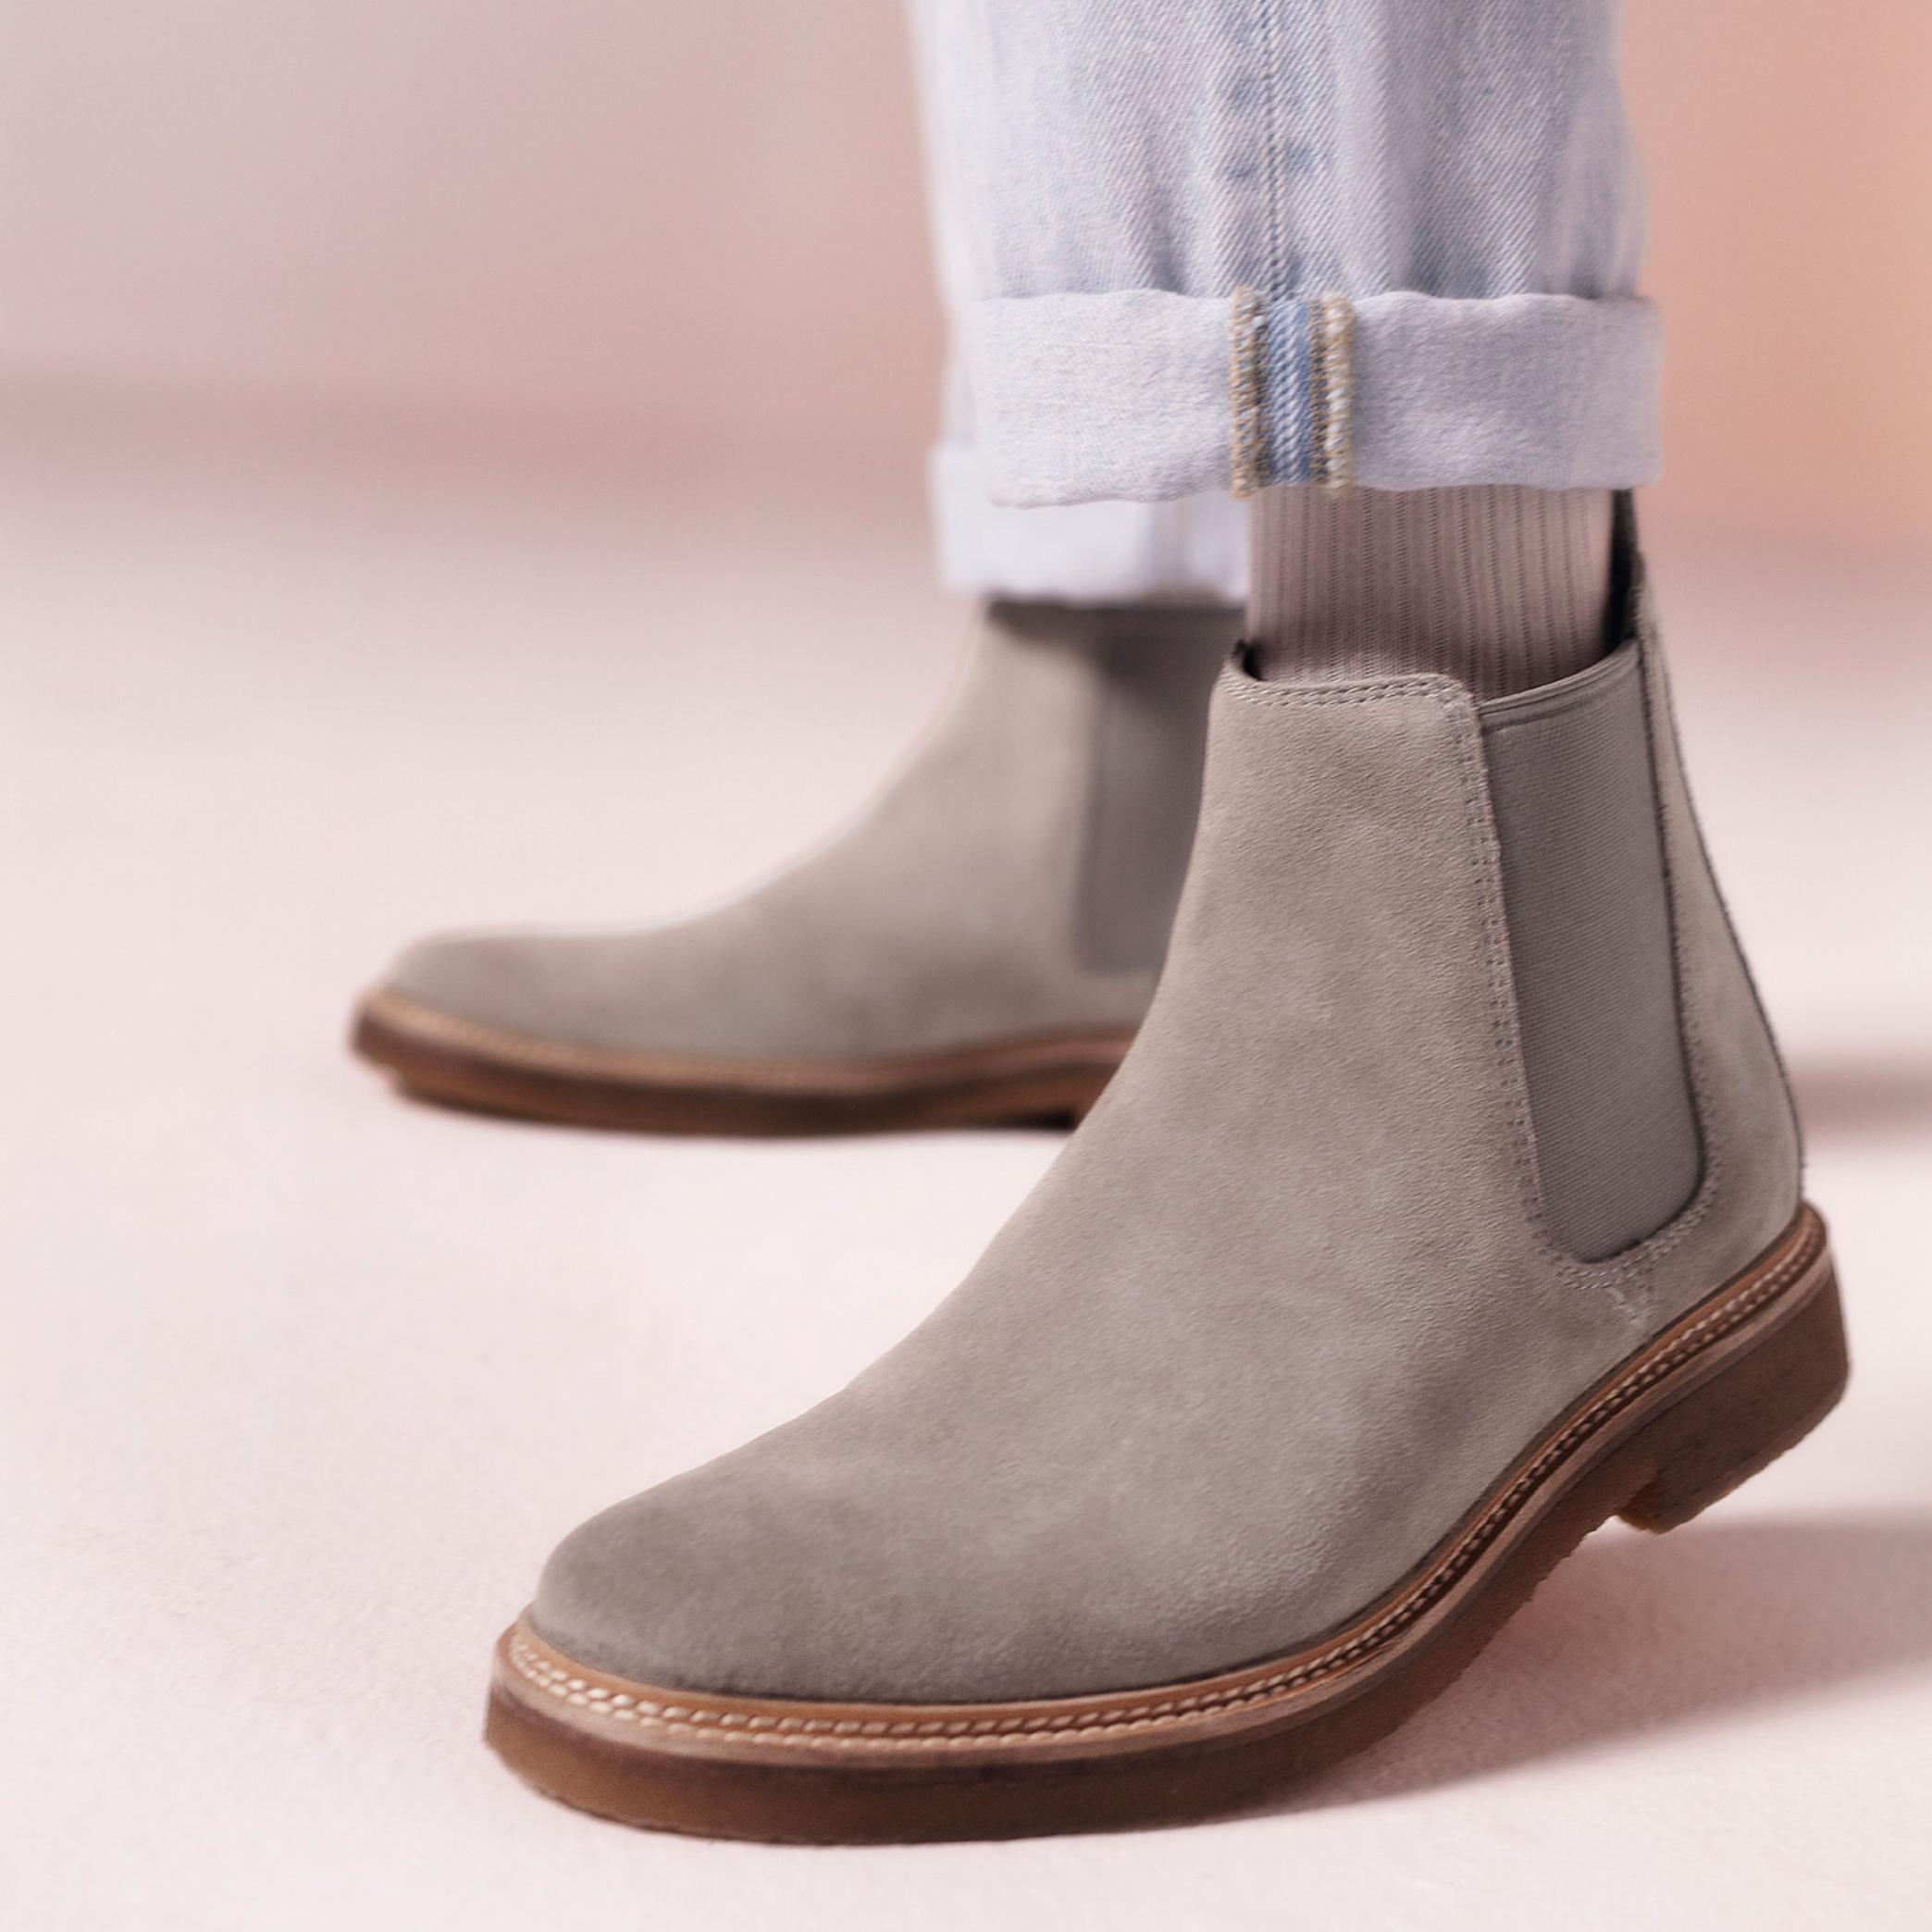 Clarkdale Easy Grey Chelsea Boots, view 2 of 8